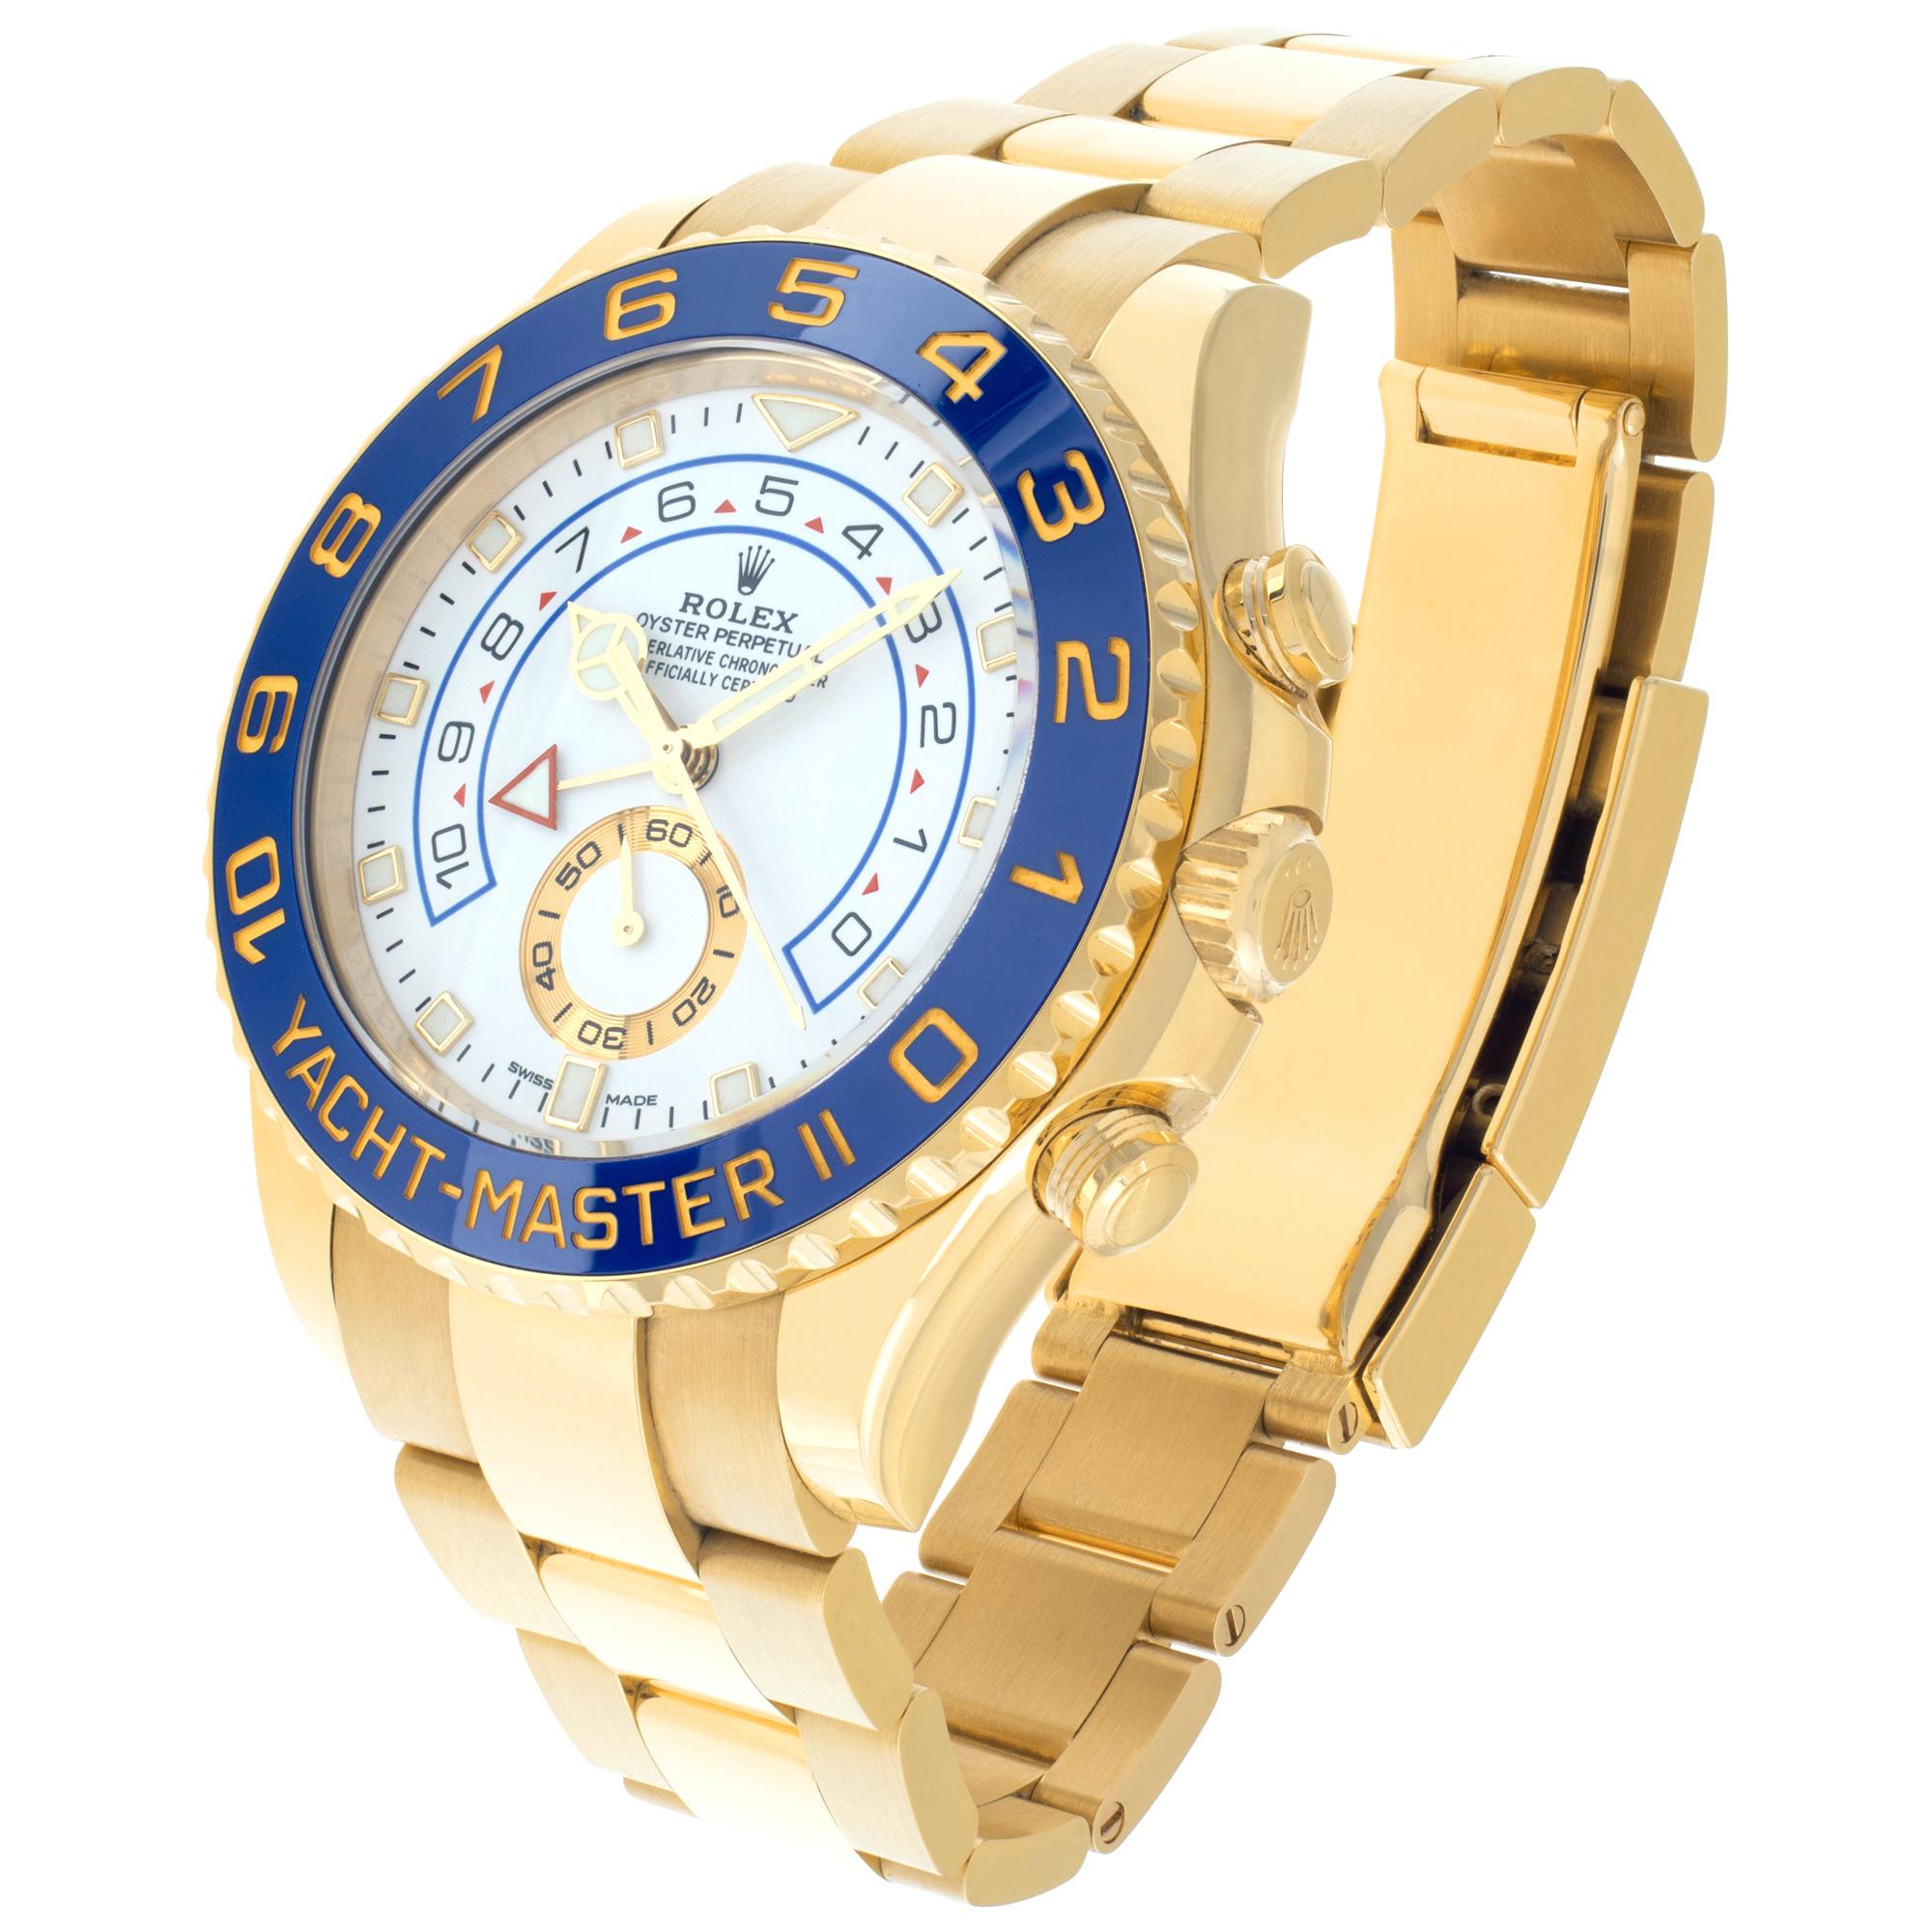 Rolex Yacht-Master II in 18k. Auto w/ subseconds. 42 mm case size. With box and papers. **Bank wire only at this price** Ref 116688. Circa 2020. Fine Pre-owned Rolex Watch. Certified preowned Dress Rolex Yacht-Master II 116688 watch is made out of